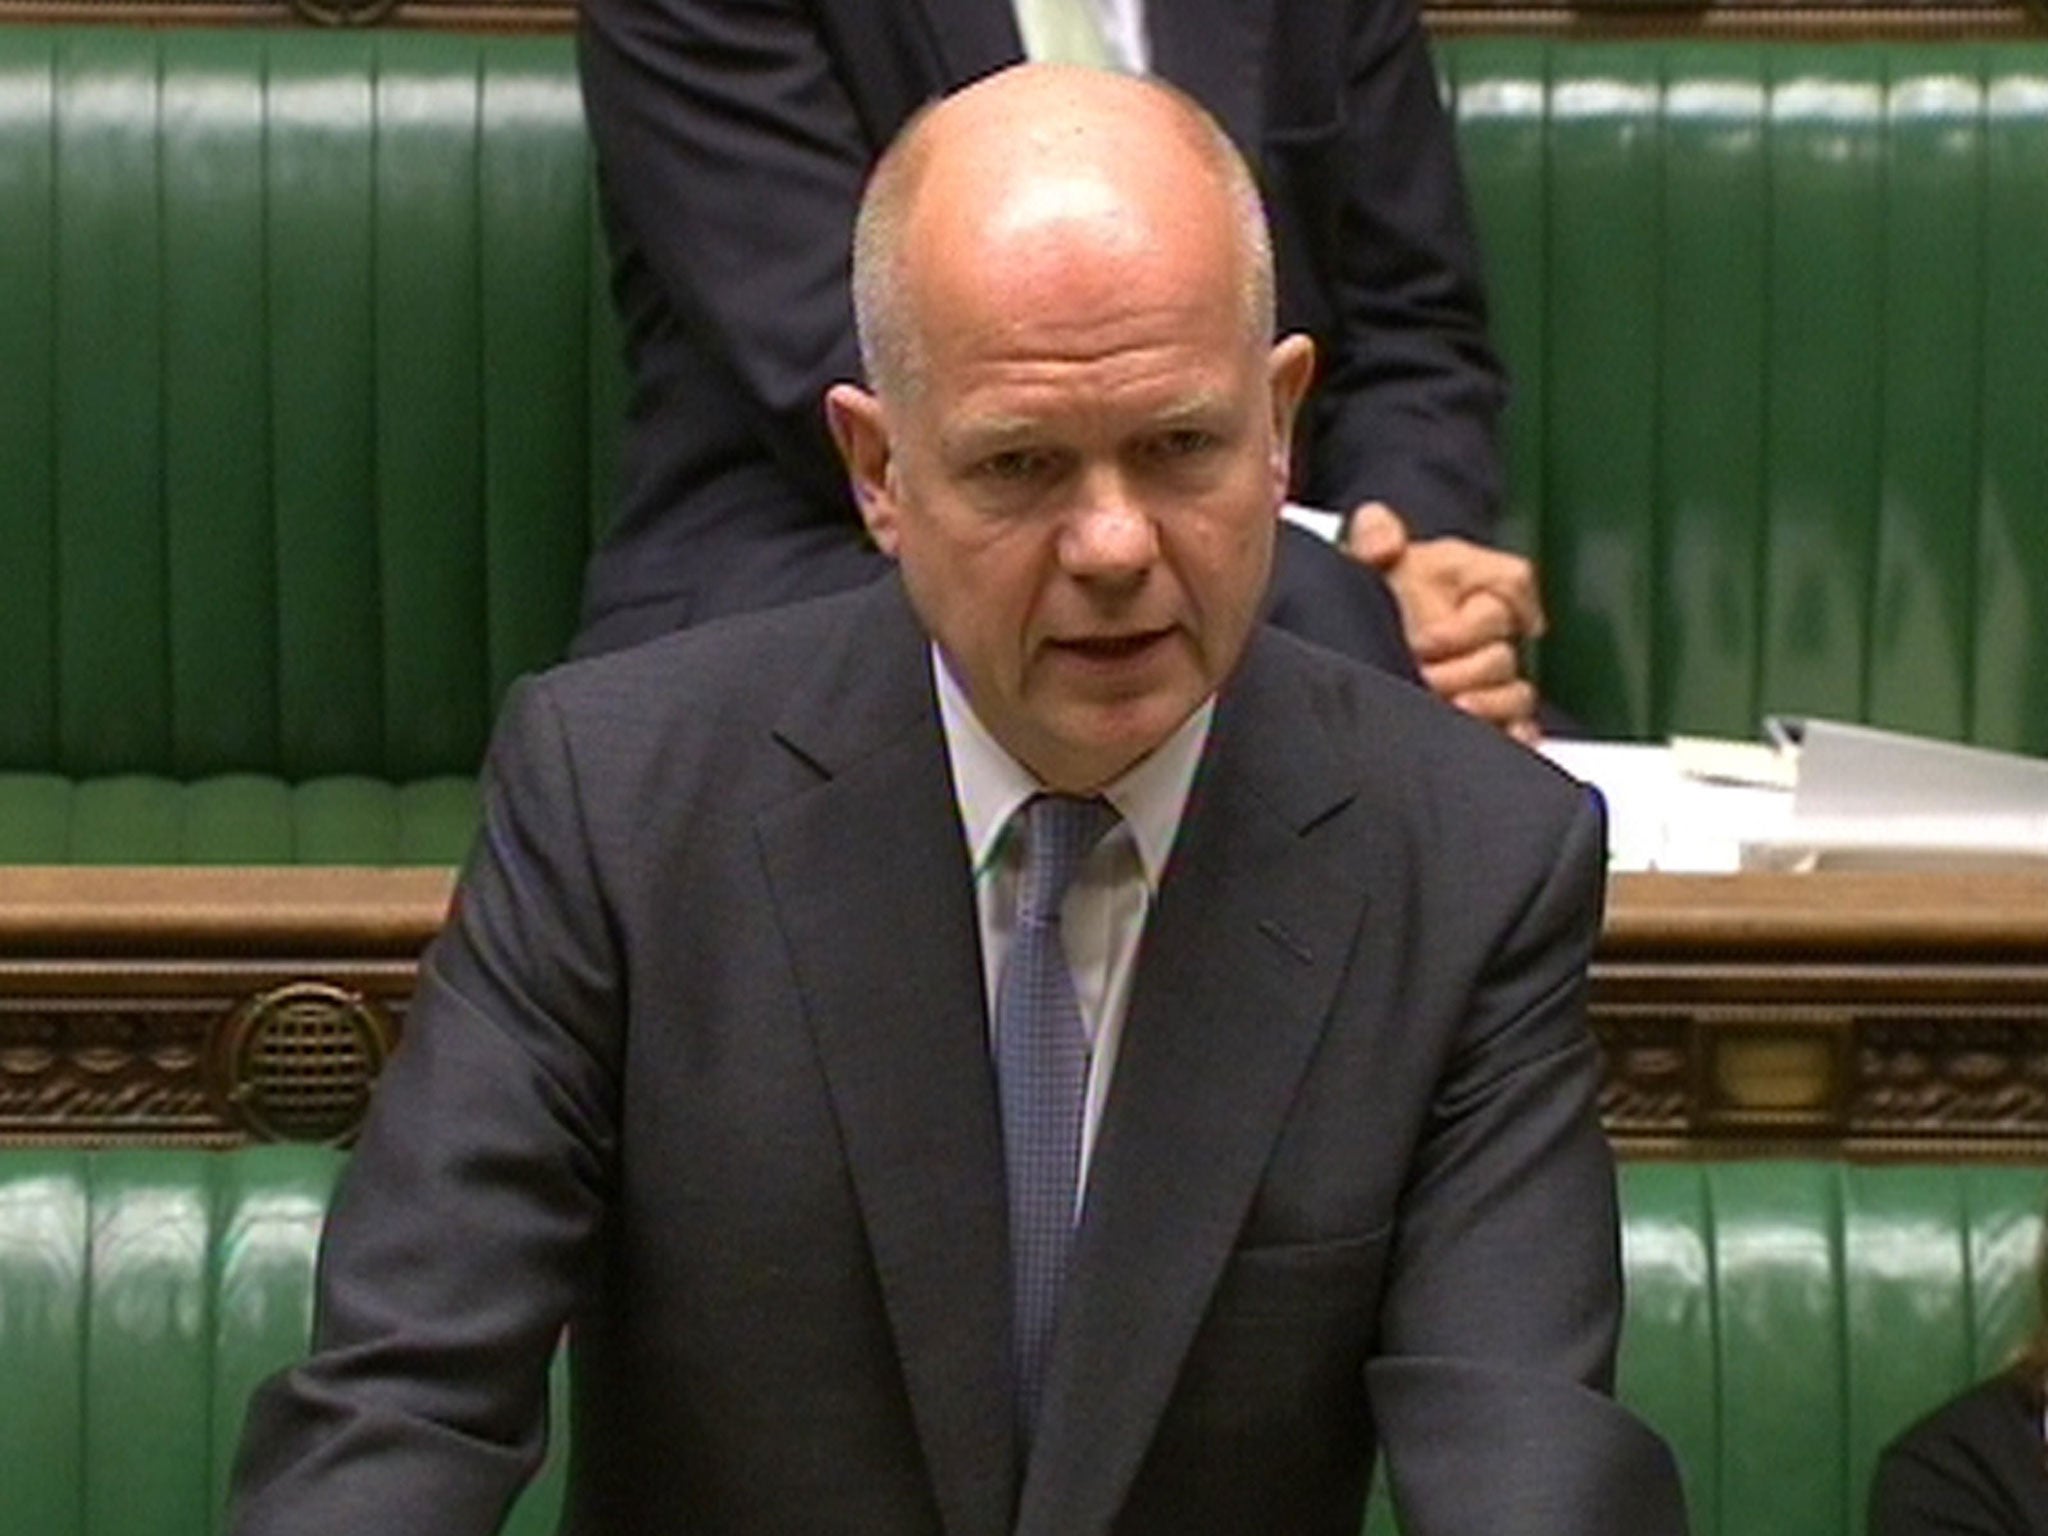 William Hague stated that the Government 'sincerely regret' the torture of thousands of Kenyan detainees